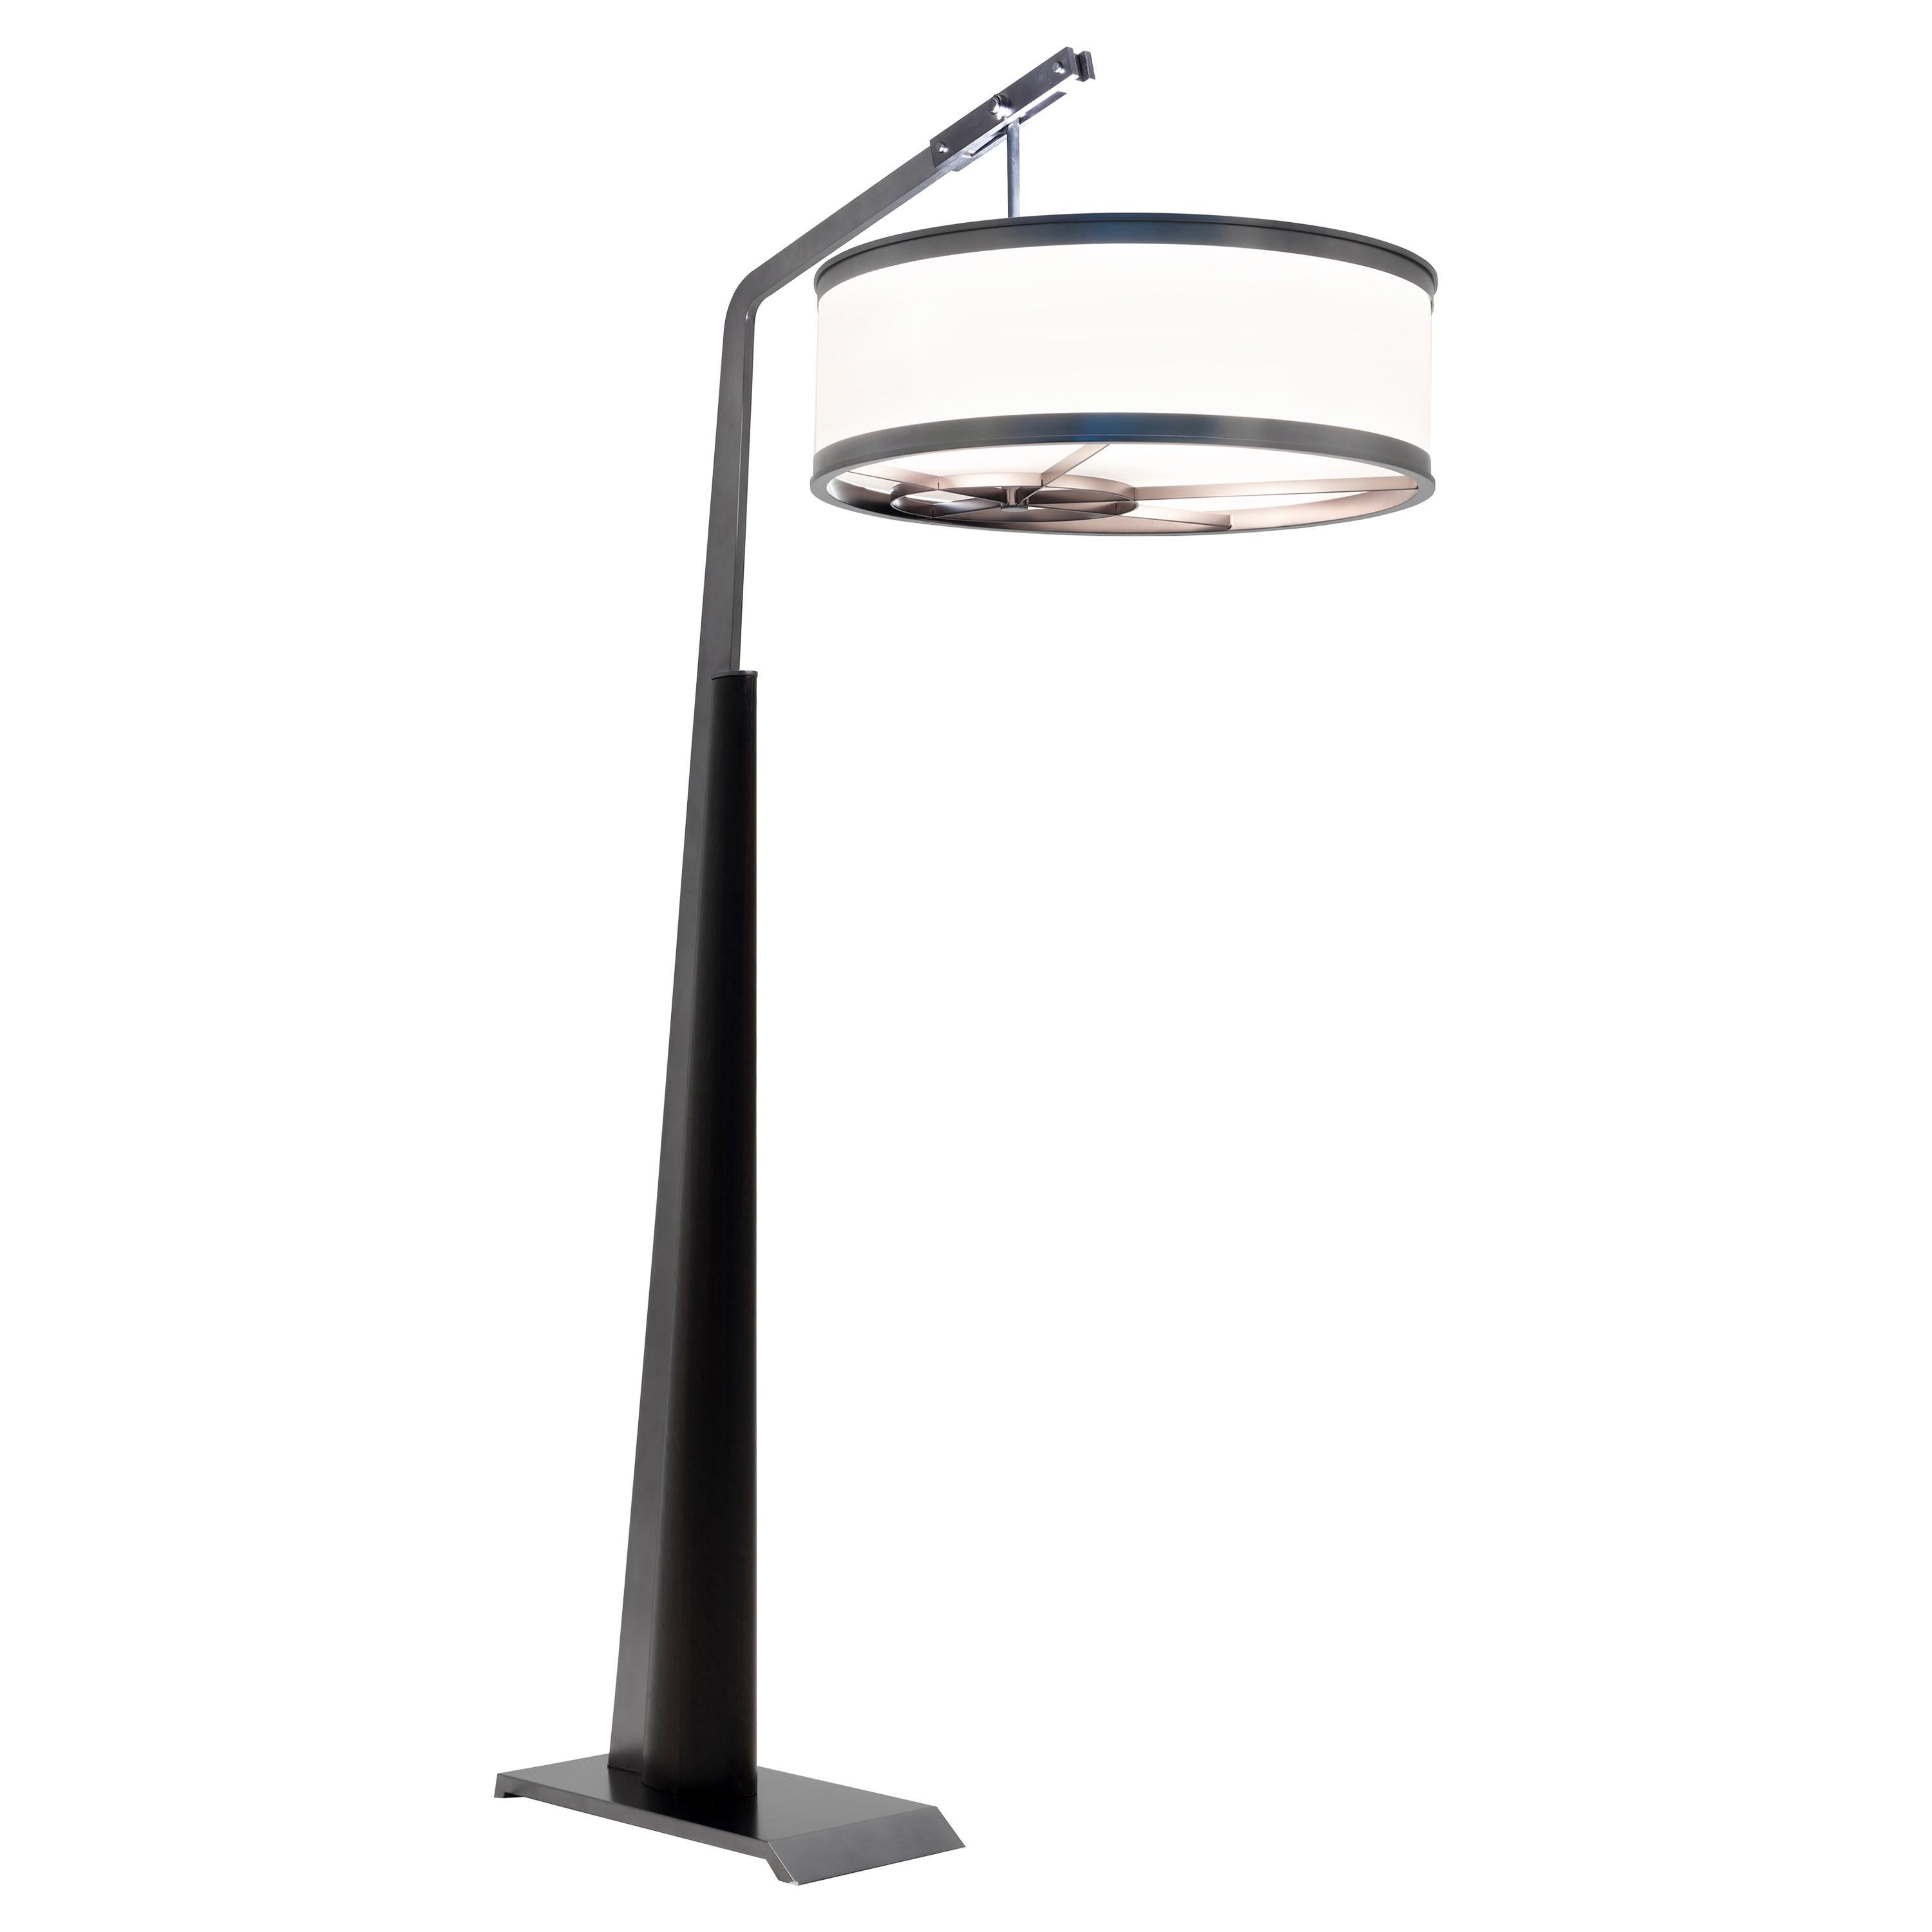 Mintaka Modern Architectural Floor Lamp with Art-Deco Vibes For Sale